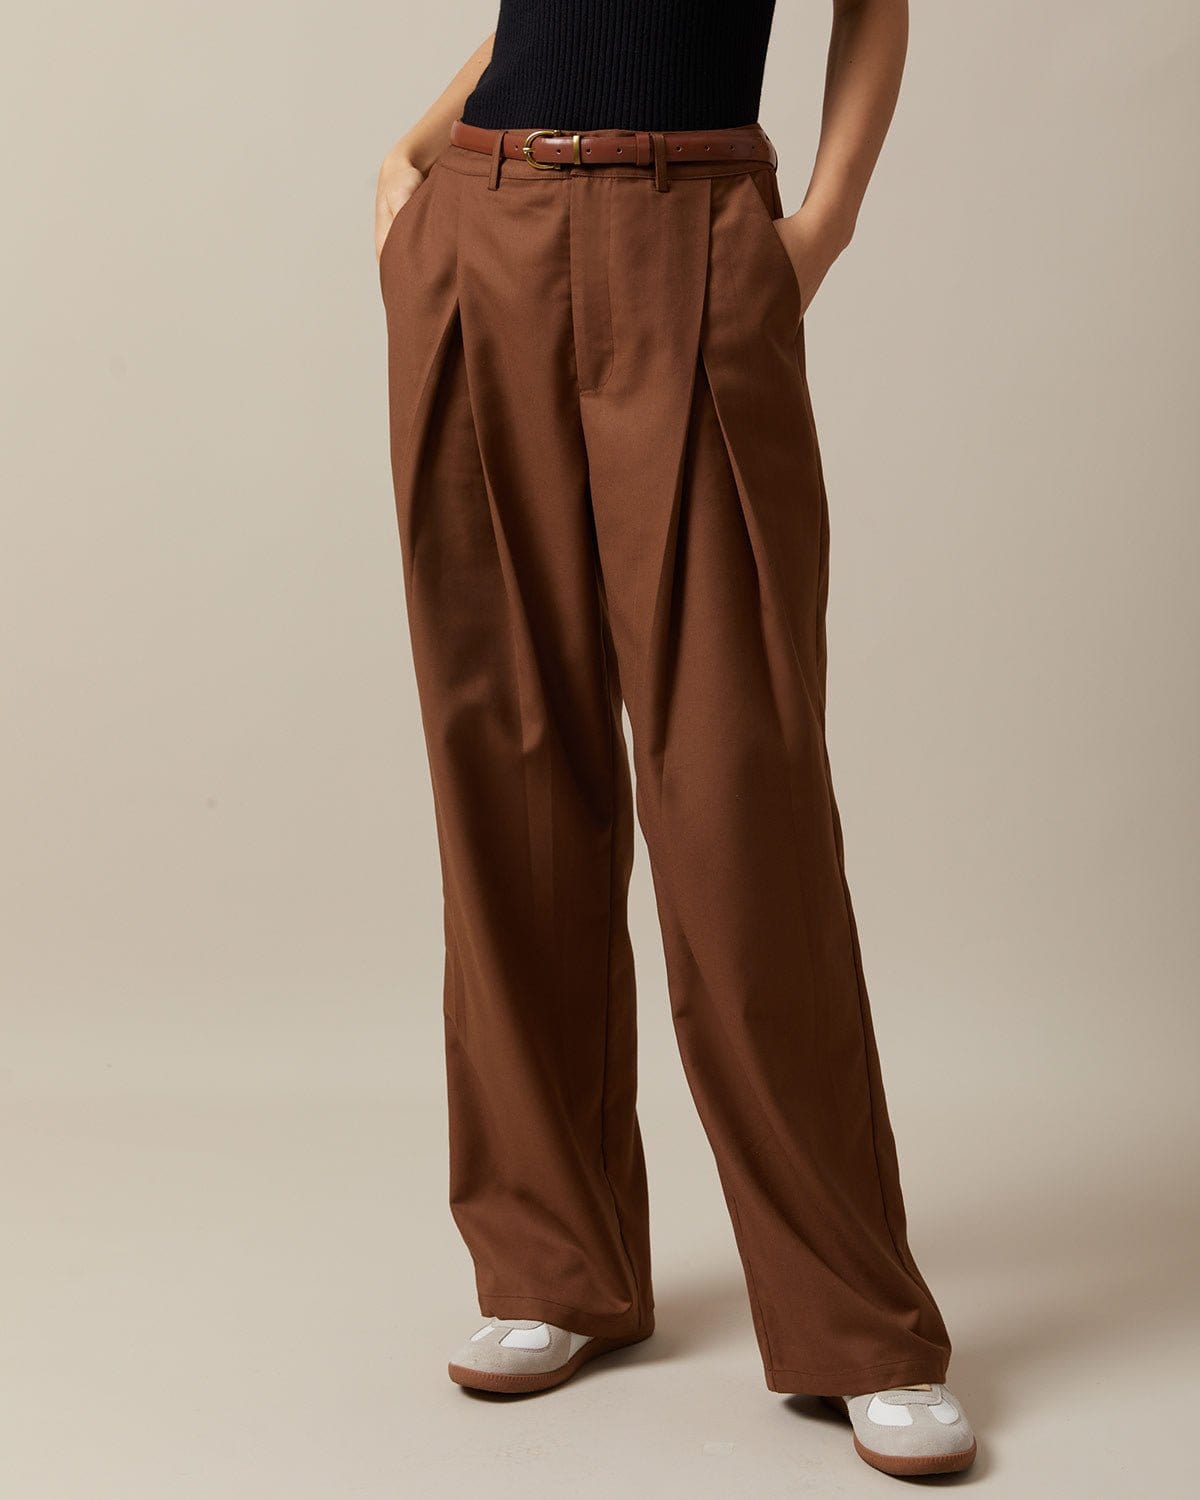 Buy Black Trousers & Pants for Women by SAM Online | Ajio.com